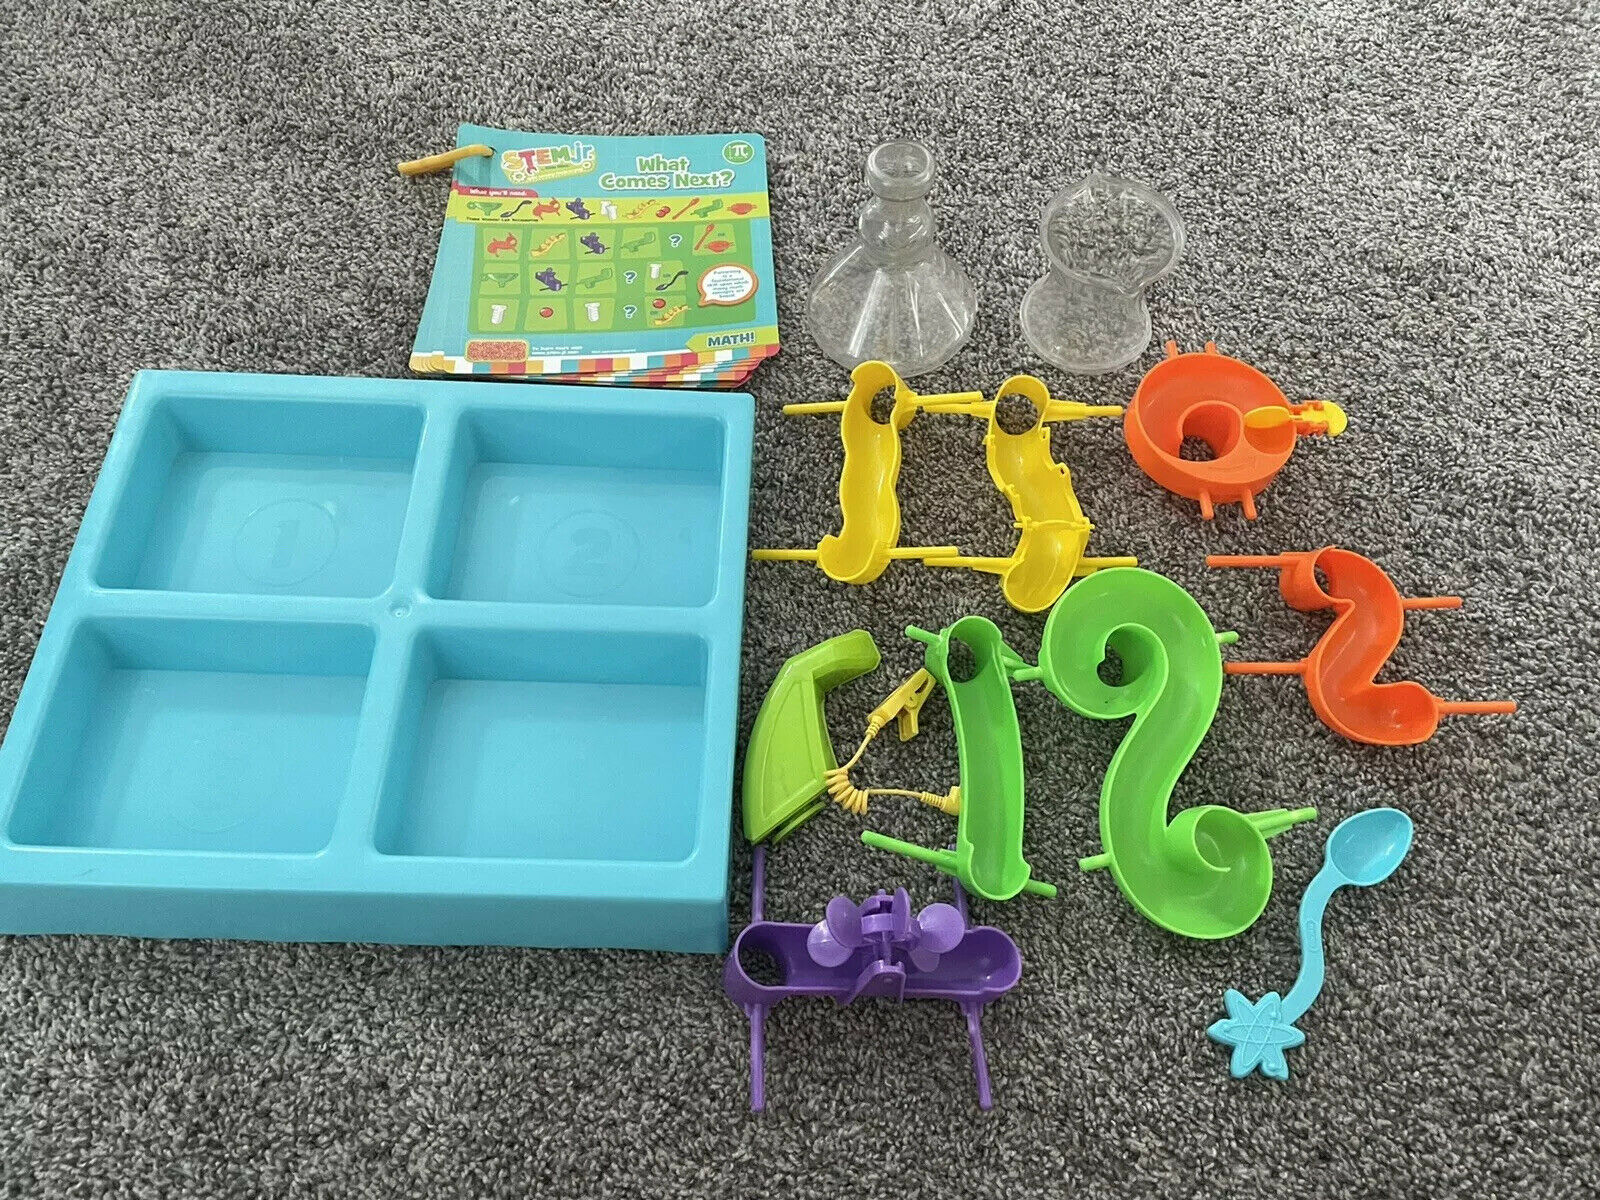 Little Tikes STEM Jr. Wonder Lab Toy Replacement Parts Only Lot Of 14 Pieces